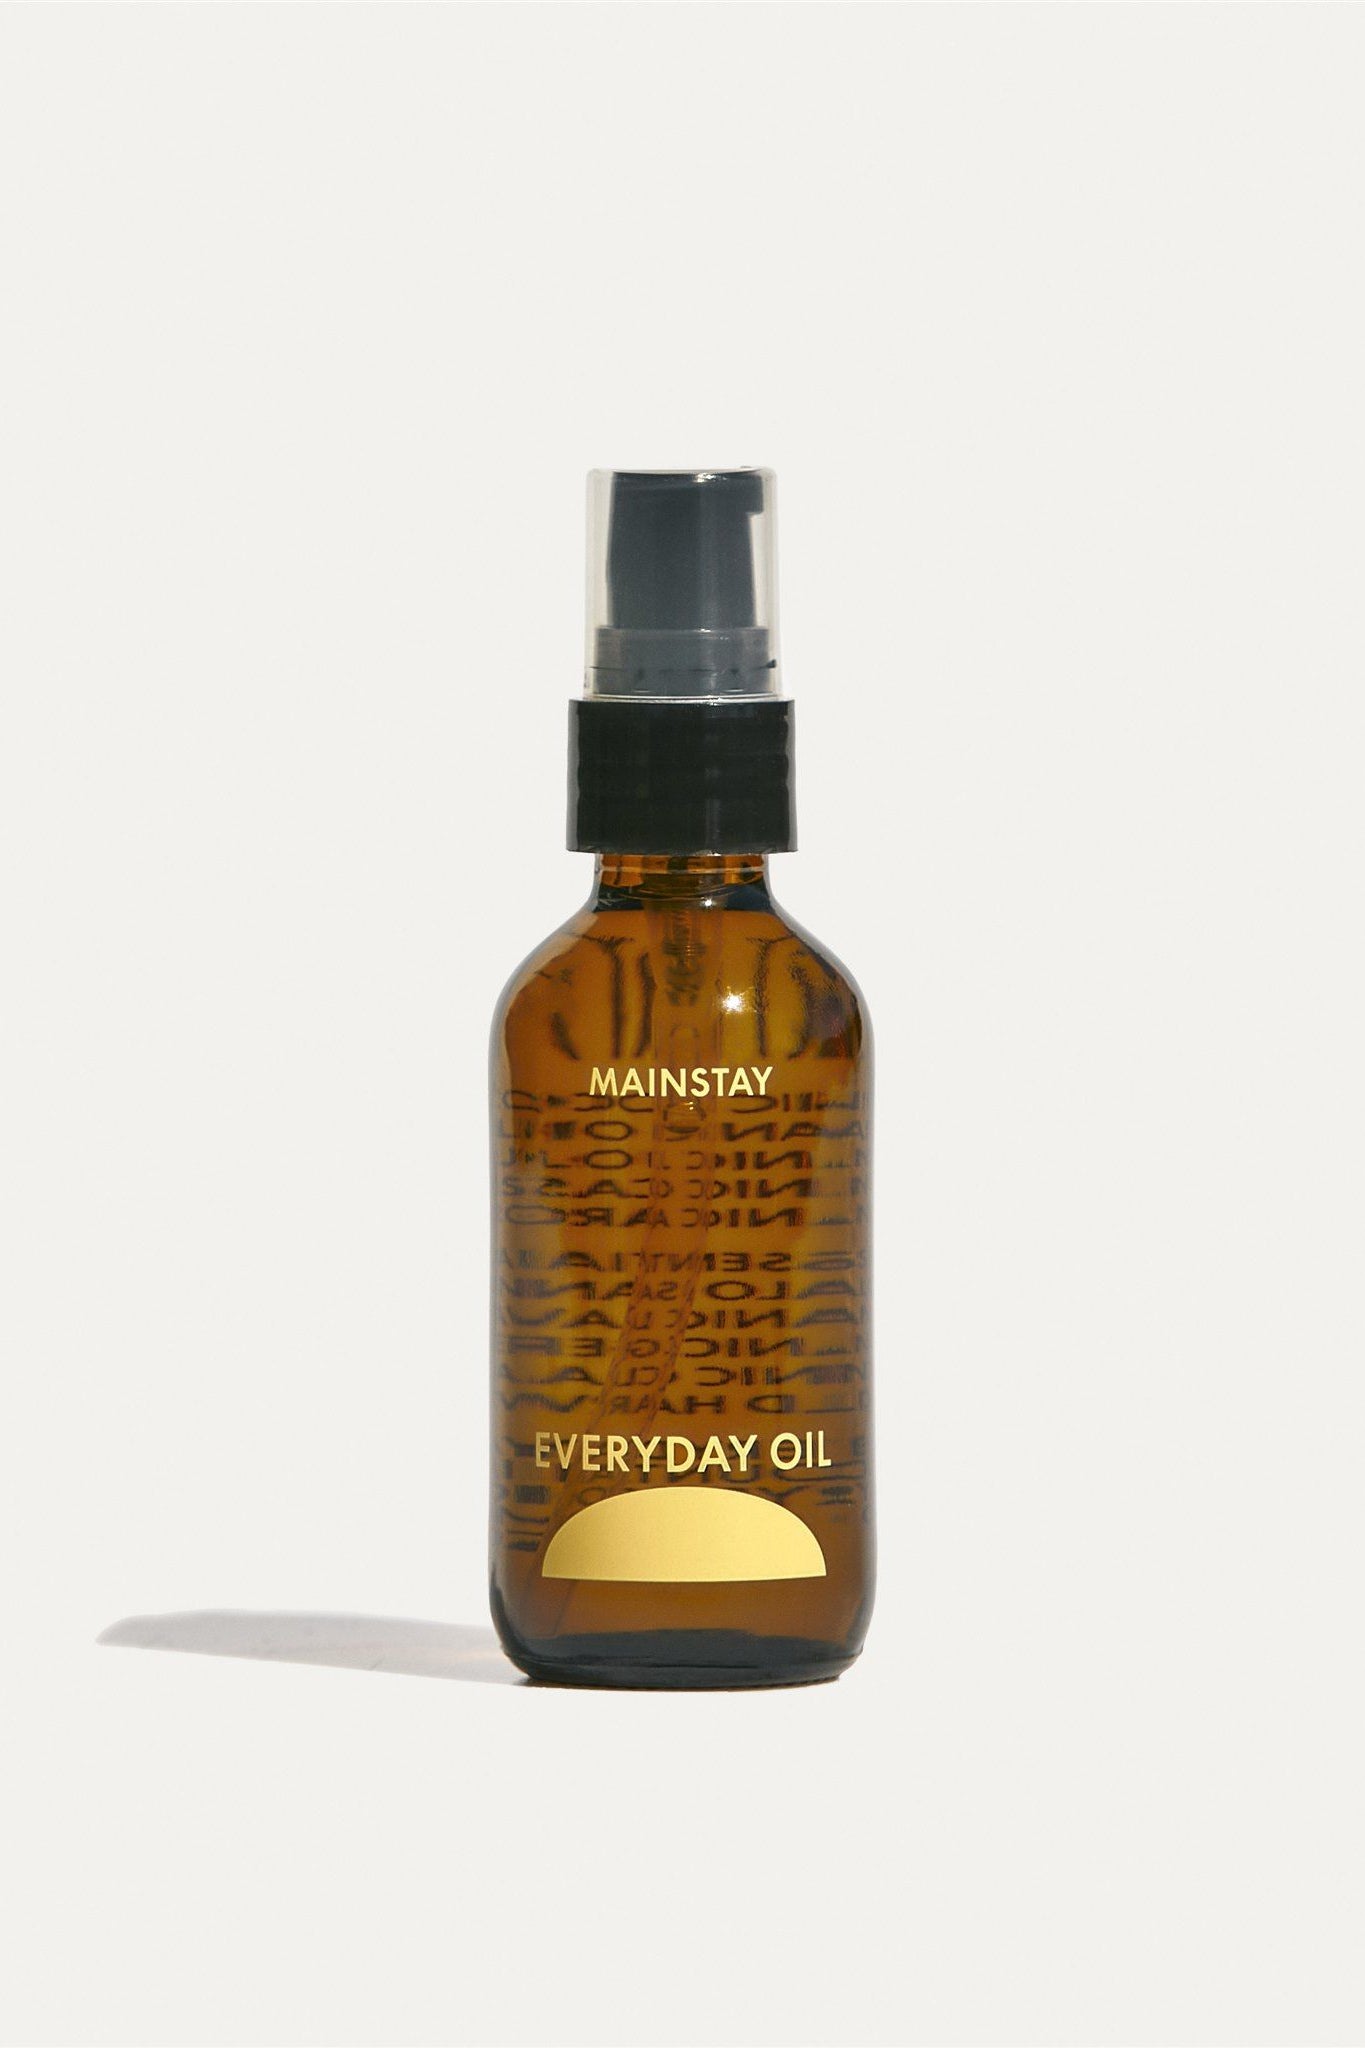 EVERYDAY OIL - 2 oz Bottle Mainstay Blend of Organic and Essential Oils for Hair, Skin, Body, and Face - Made in USA